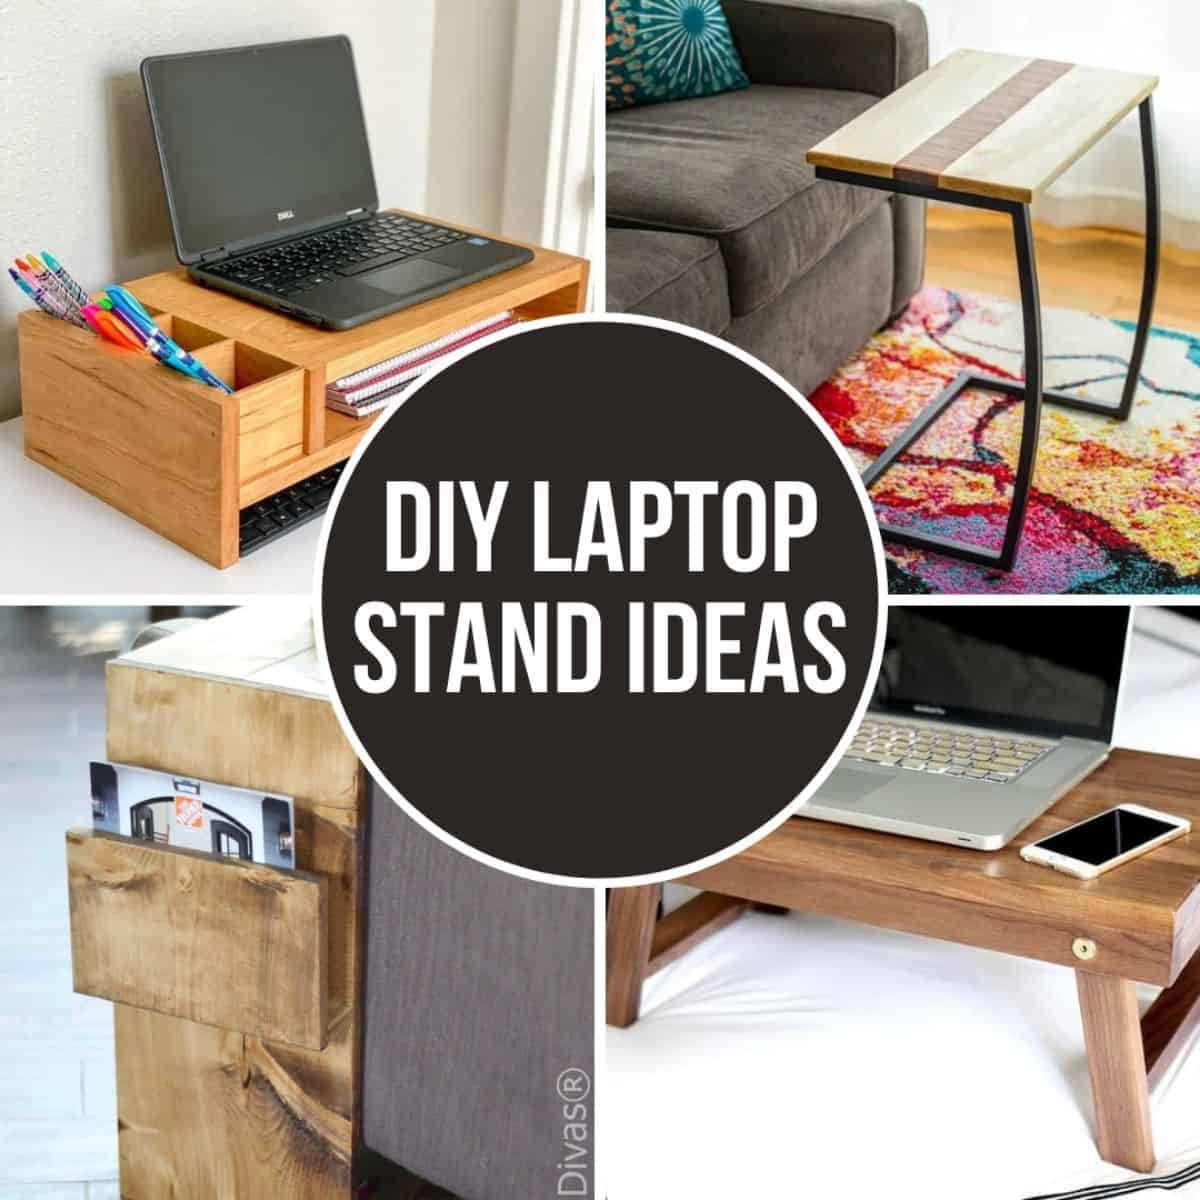 Easy DIY Monitor Stand From Wood Scraps - Houseful of Handmade